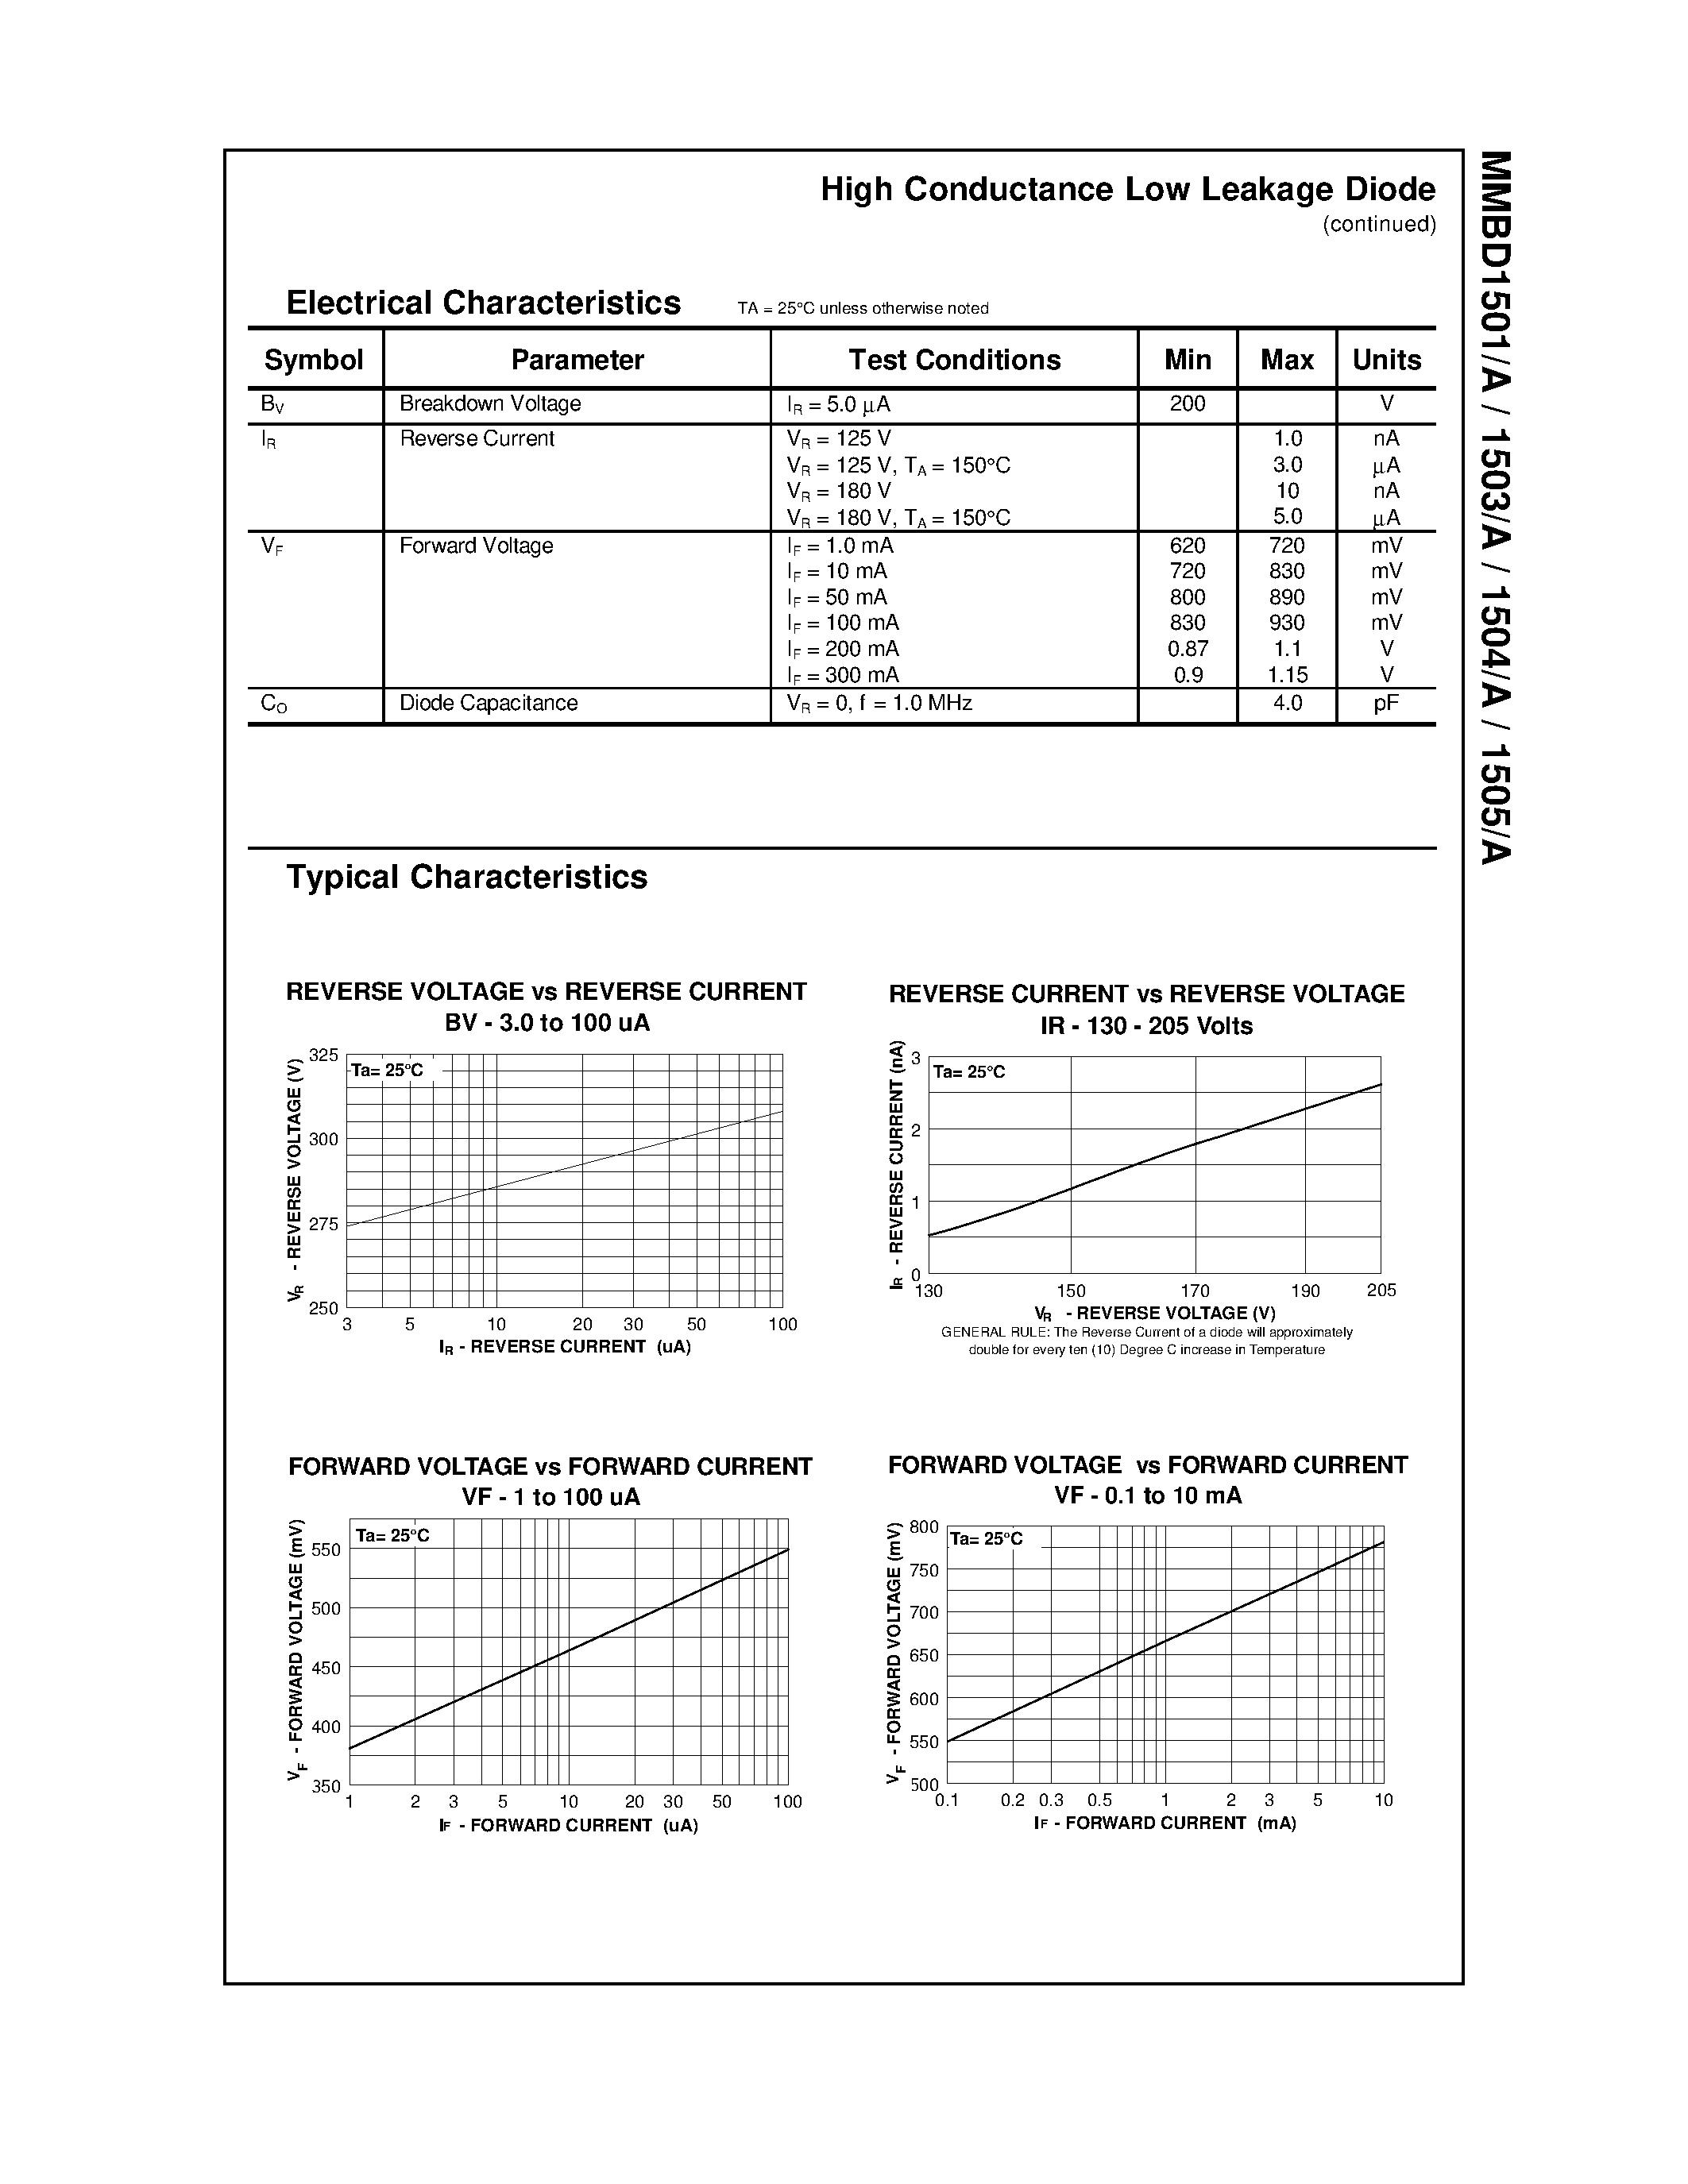 Datasheet MMBD1501A - High Conductance Low Leakage Diode page 2